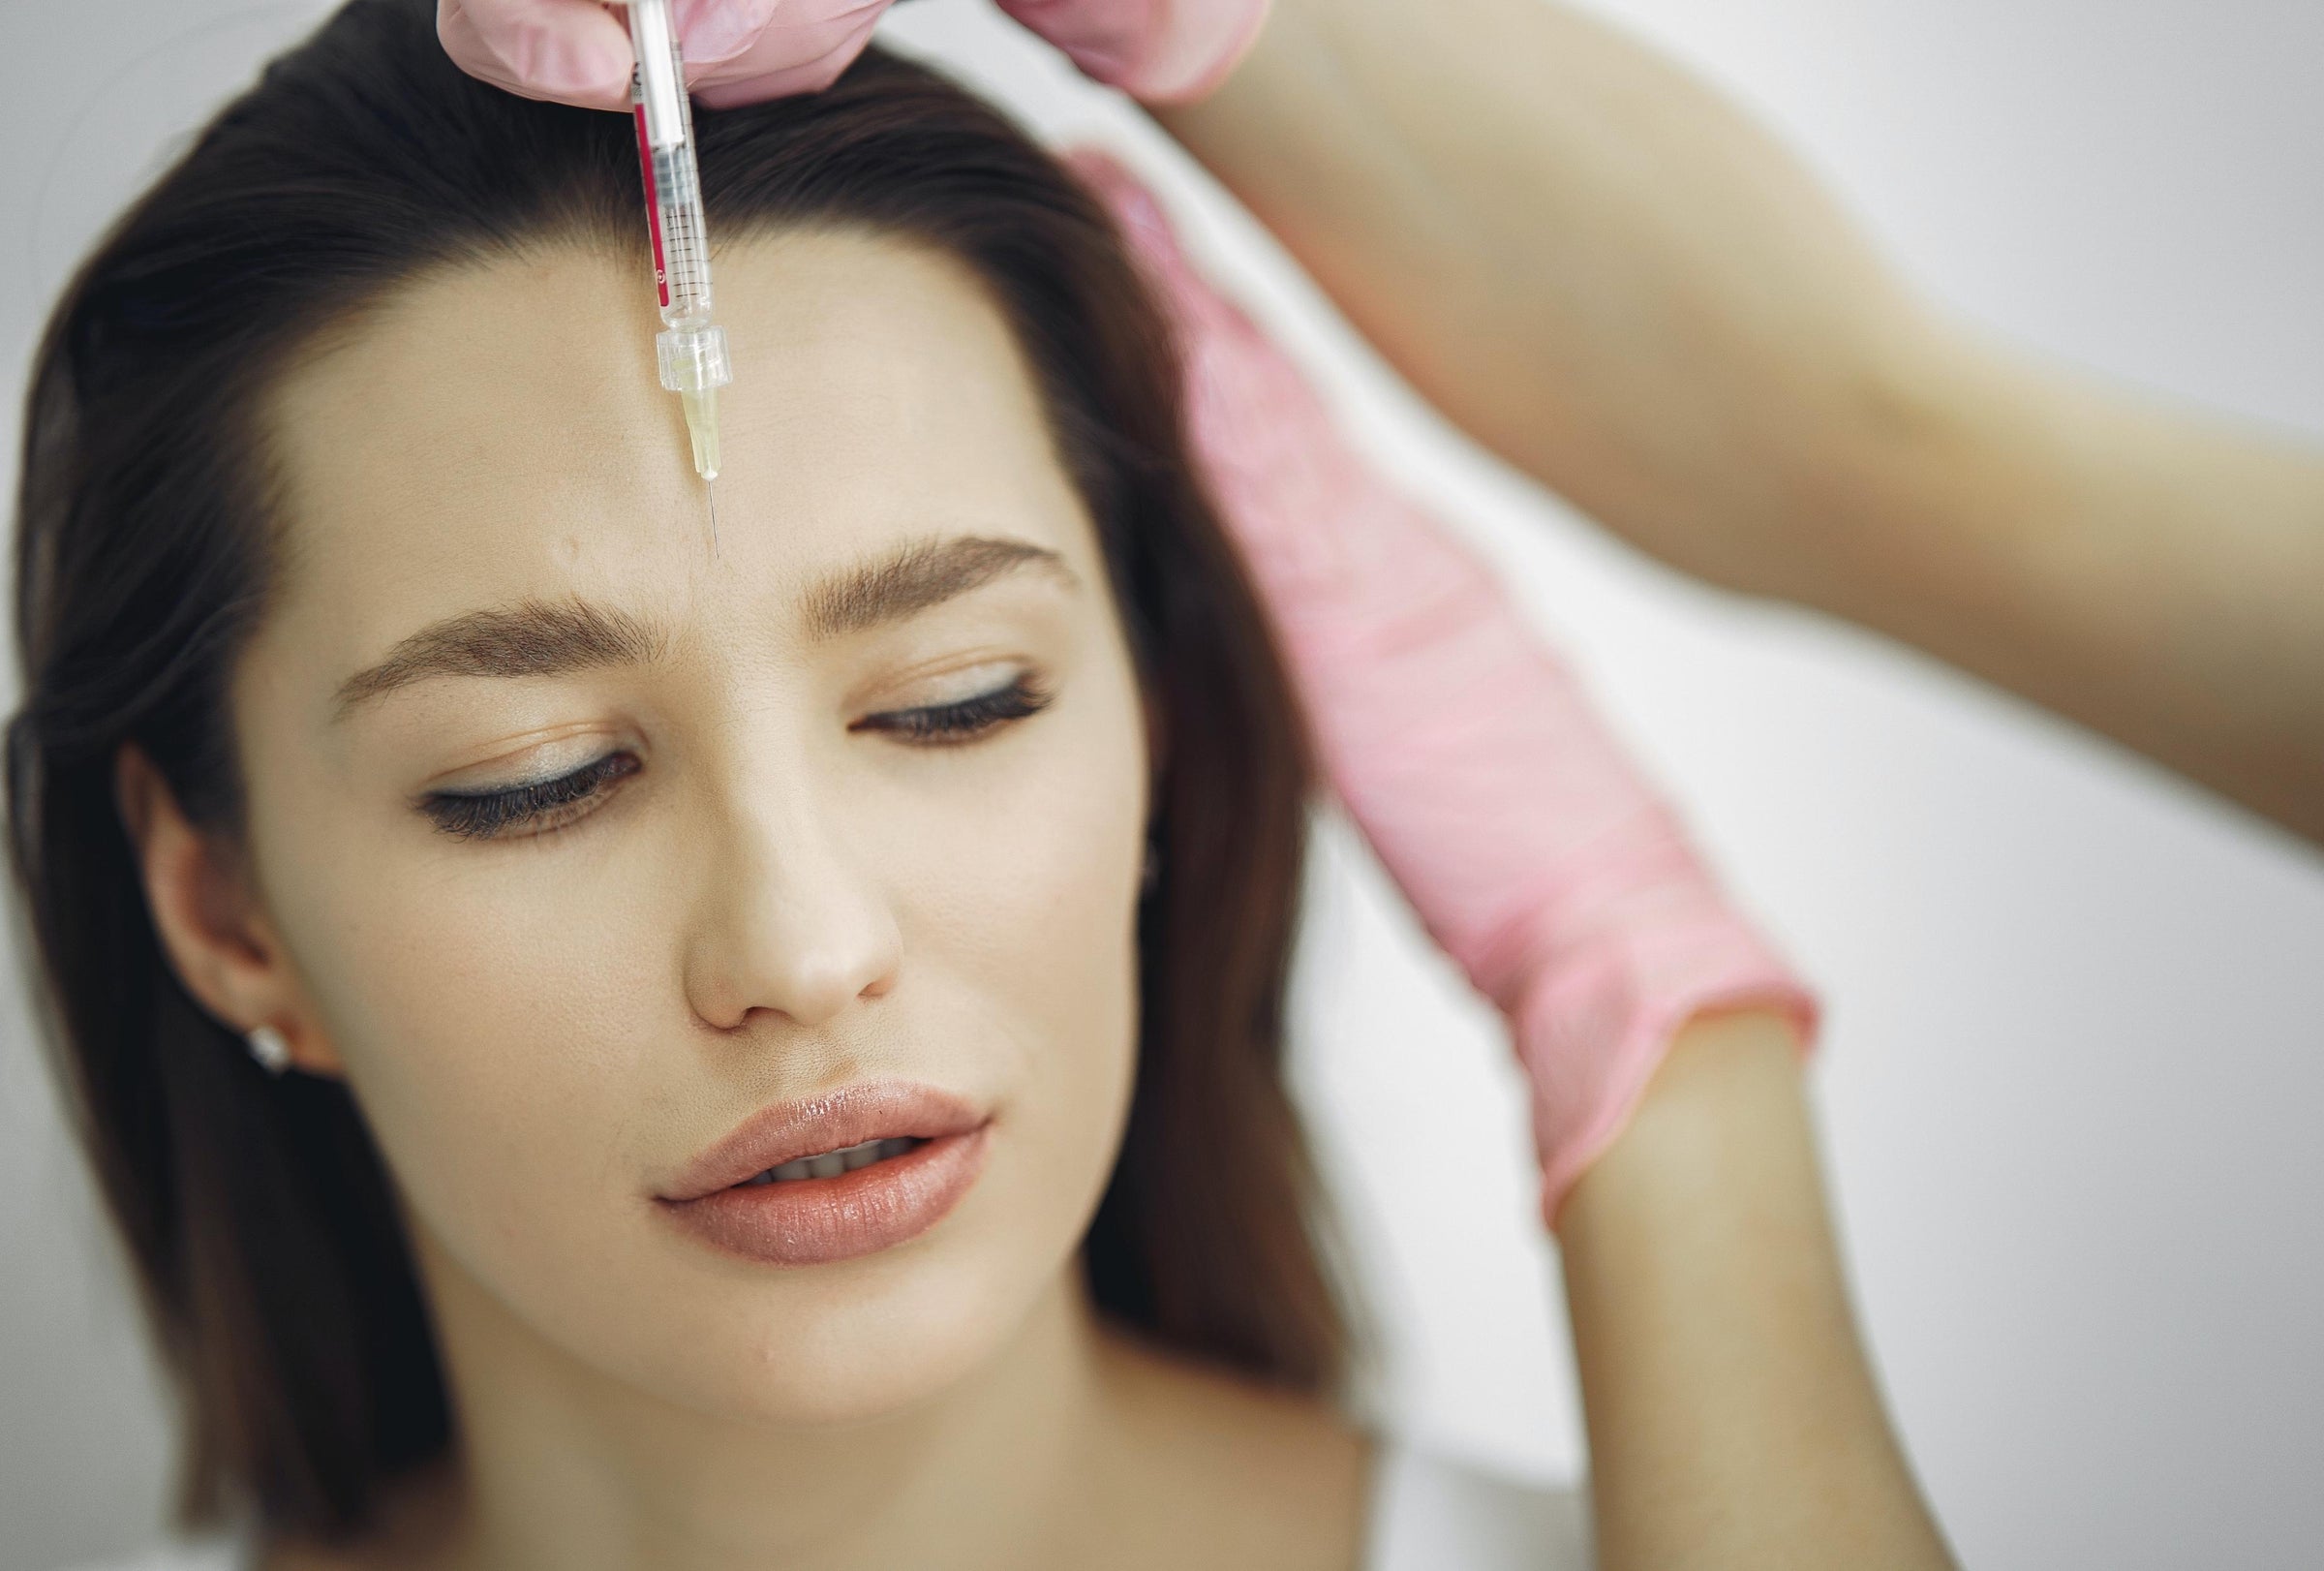 Top 10 Plastic Surgery Recovery & Aftercare Tips